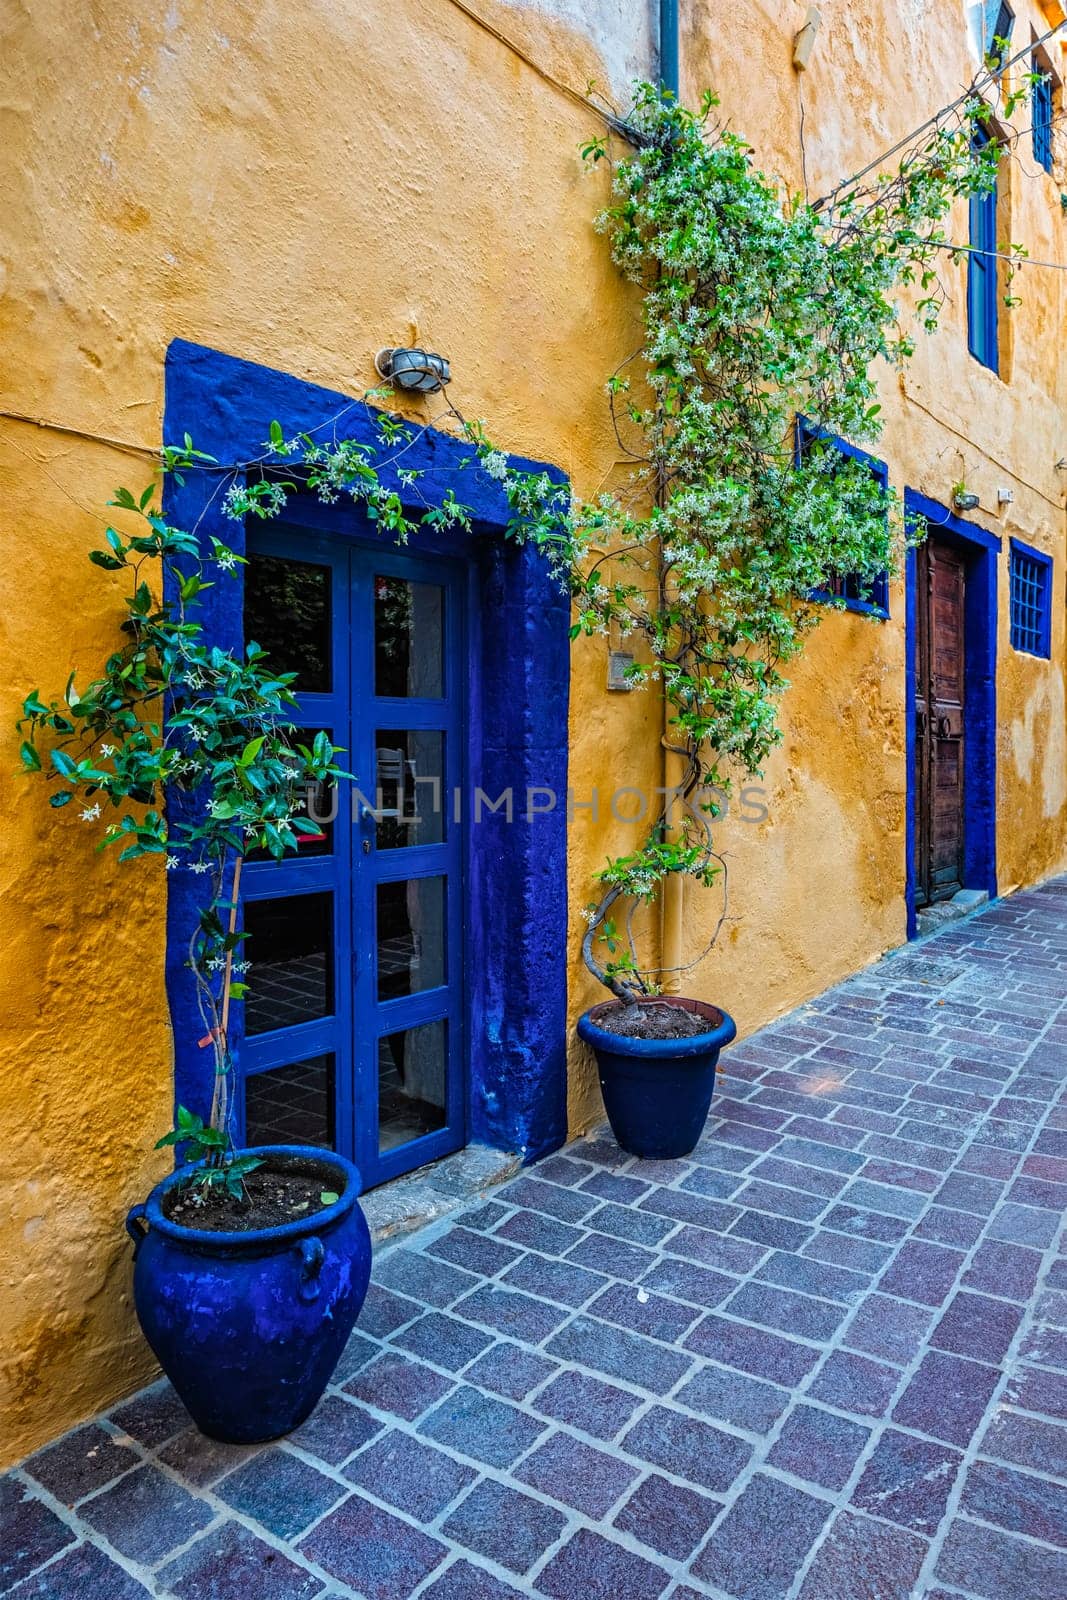 Scenic picturesque streets of Chania venetian town. Chania, Creete, Greece by dimol